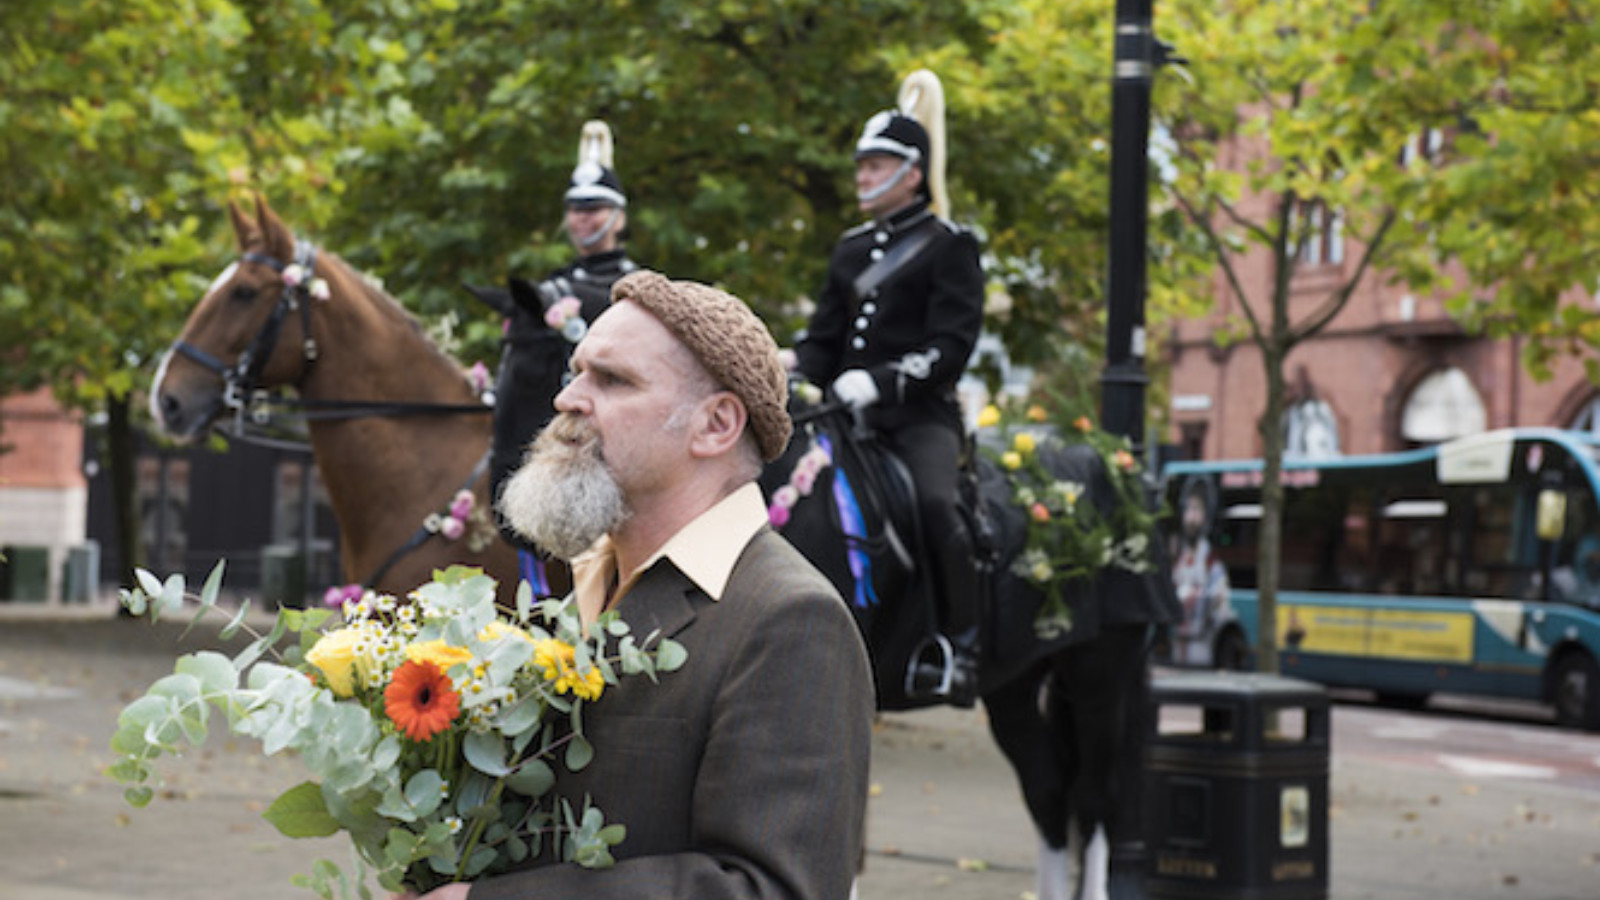 Artist Mark Storor stands in a community square wearing a brown suit and holding a large bunch of flowers. Behind Mark two mounted police officers sit on horses adorned with roses and greenery.